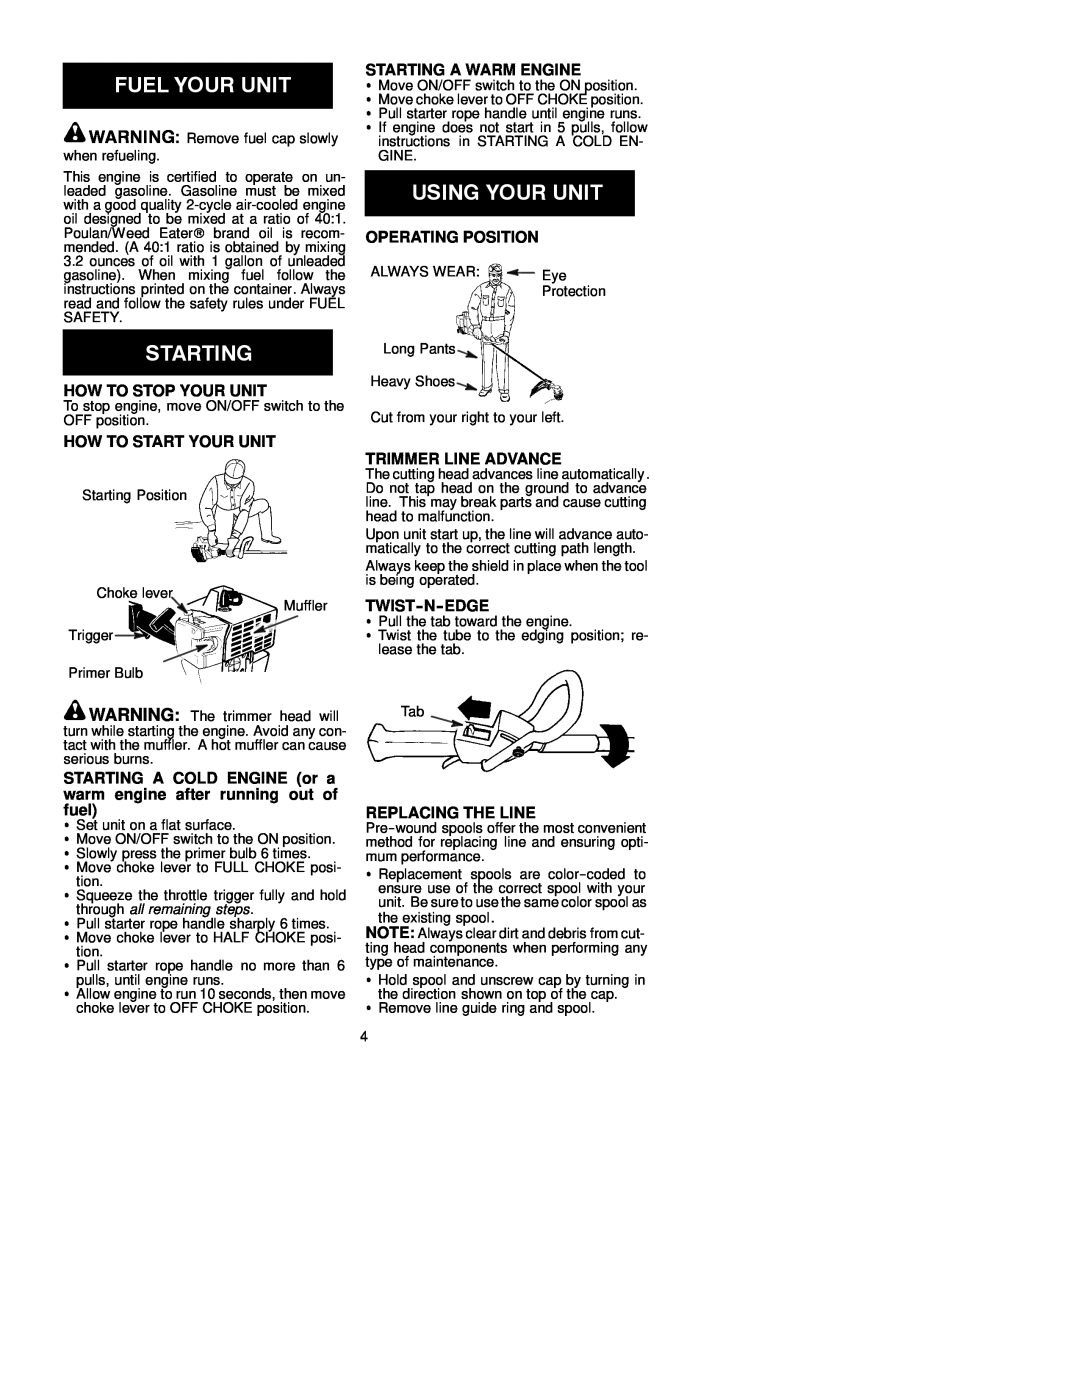 Weed Eater 530086281 manual How To Stop Your Unit, How To Start Your Unit, Starting A Warm Engine, Operating Position 